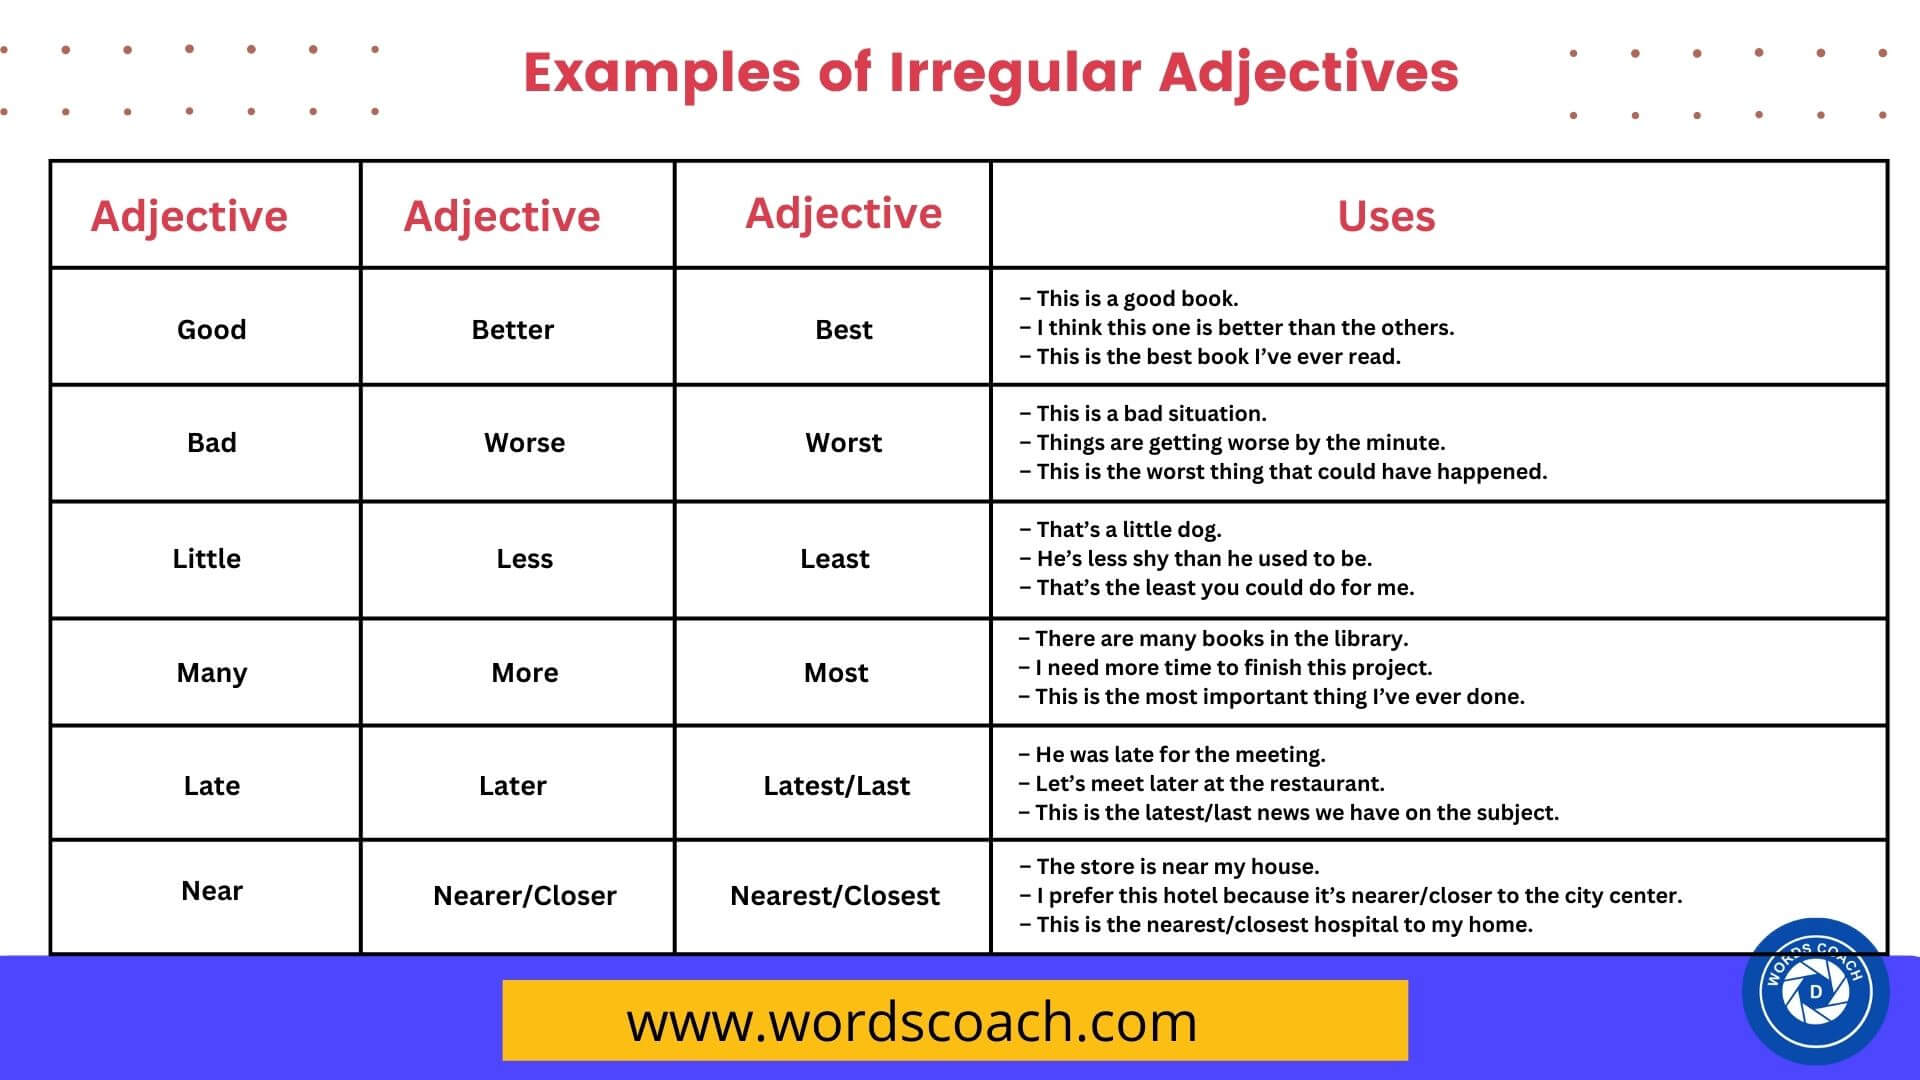 70+ Examples of Irregular Adjectives in English - Word Coach